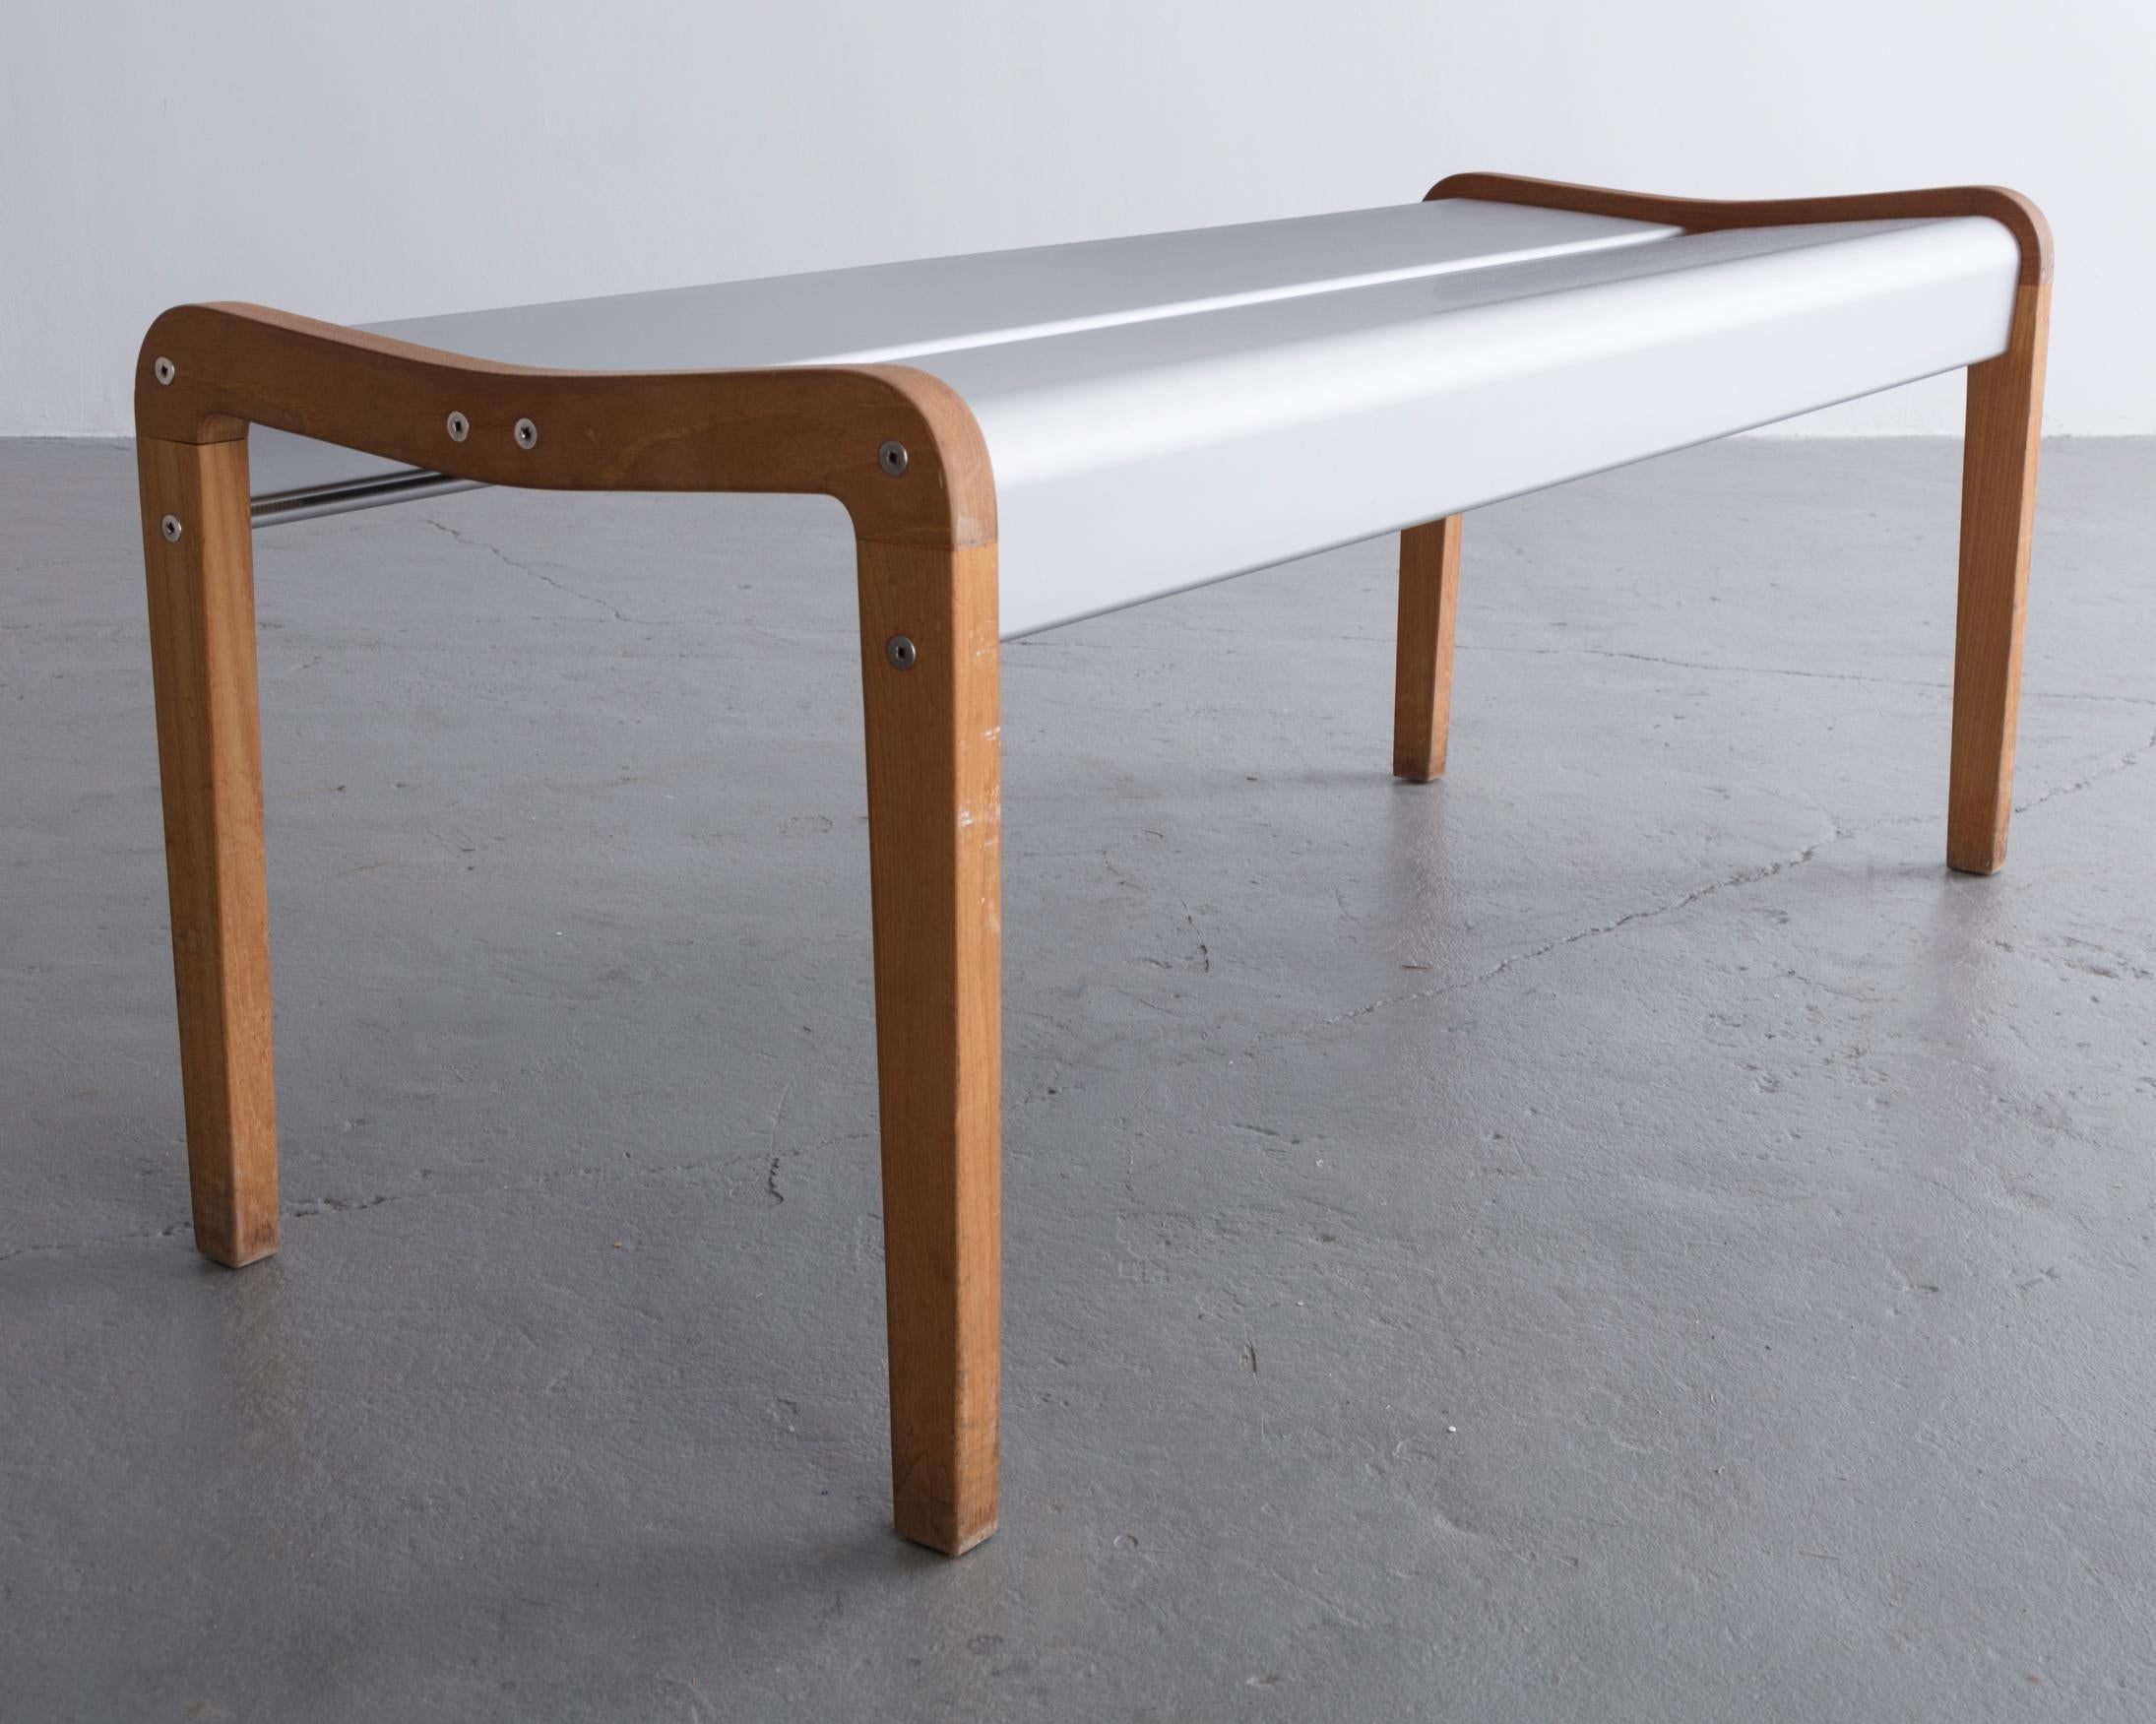 Modern Rasamny Bench 2 in Anodized Extruded Aluminum and Wood by Ali Tayar, 1999